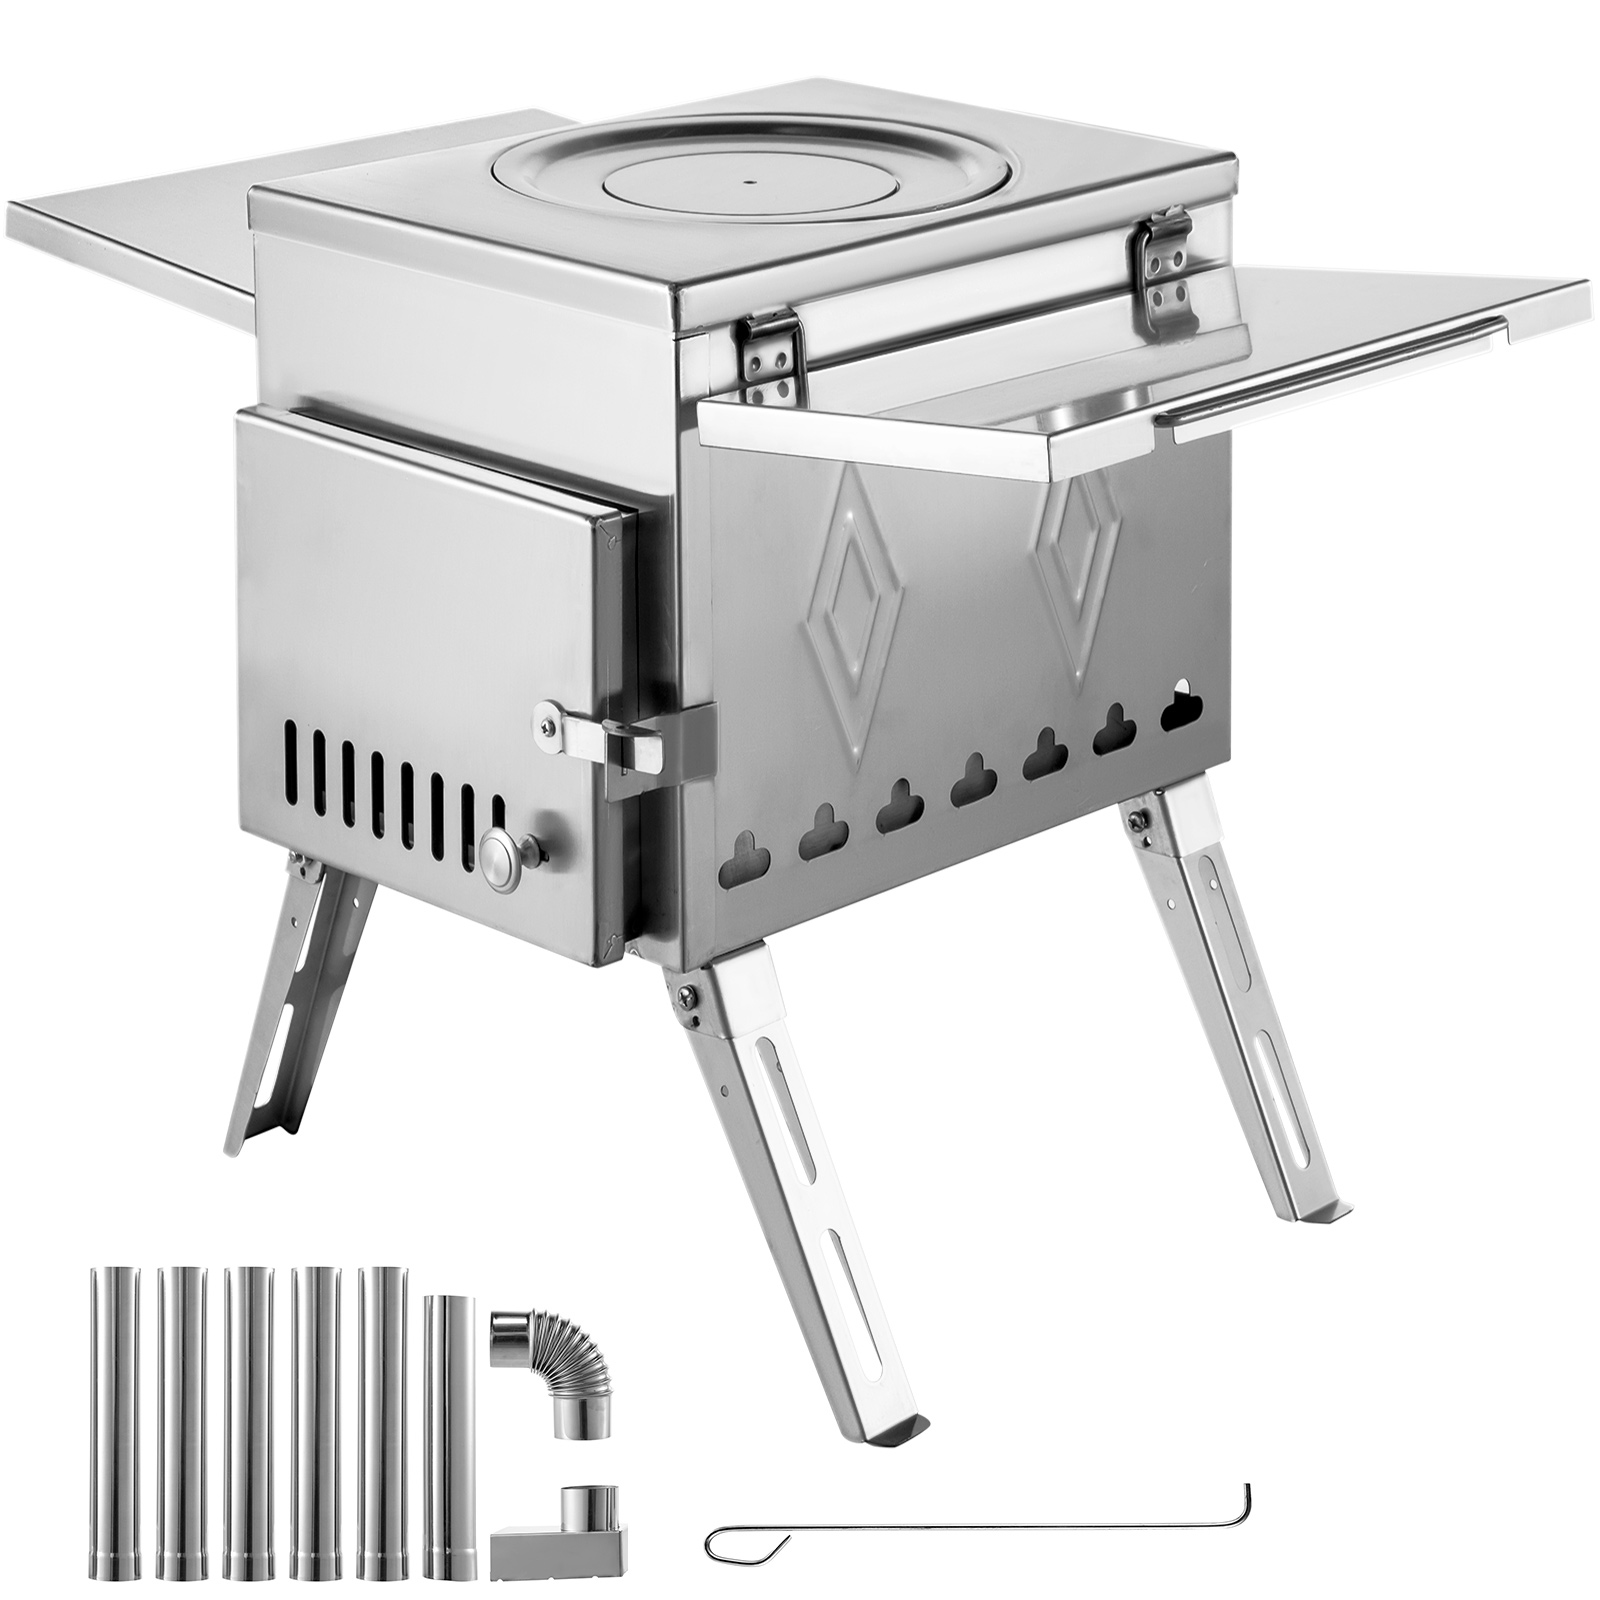 https://d2qc09rl1gfuof.cloudfront.net/product/ZPQNLYXBXGL000001/tent-wood-stove-m100-1.2.jpg